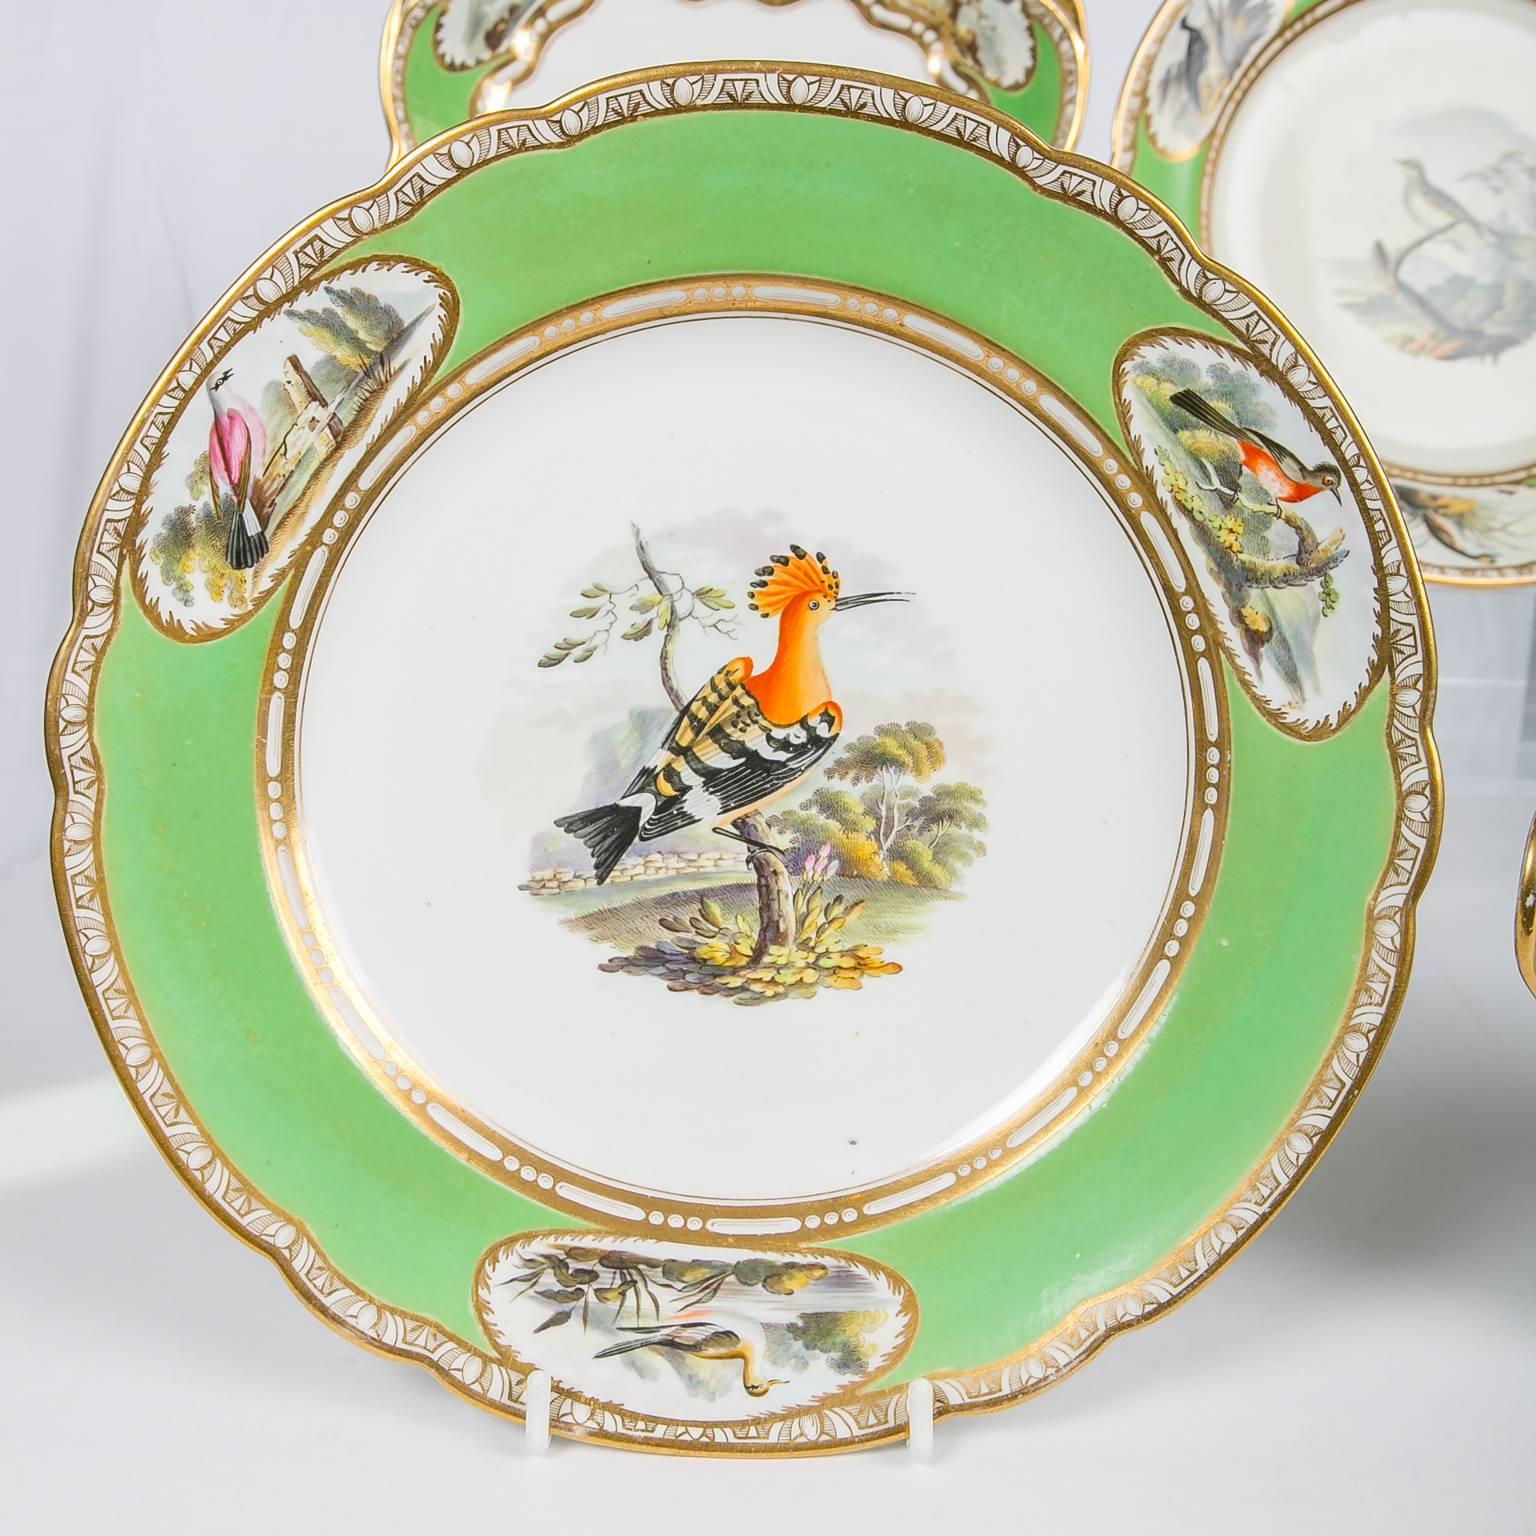 Spode Dishes with Hand-Painted Birds and Apple Green Borders 1